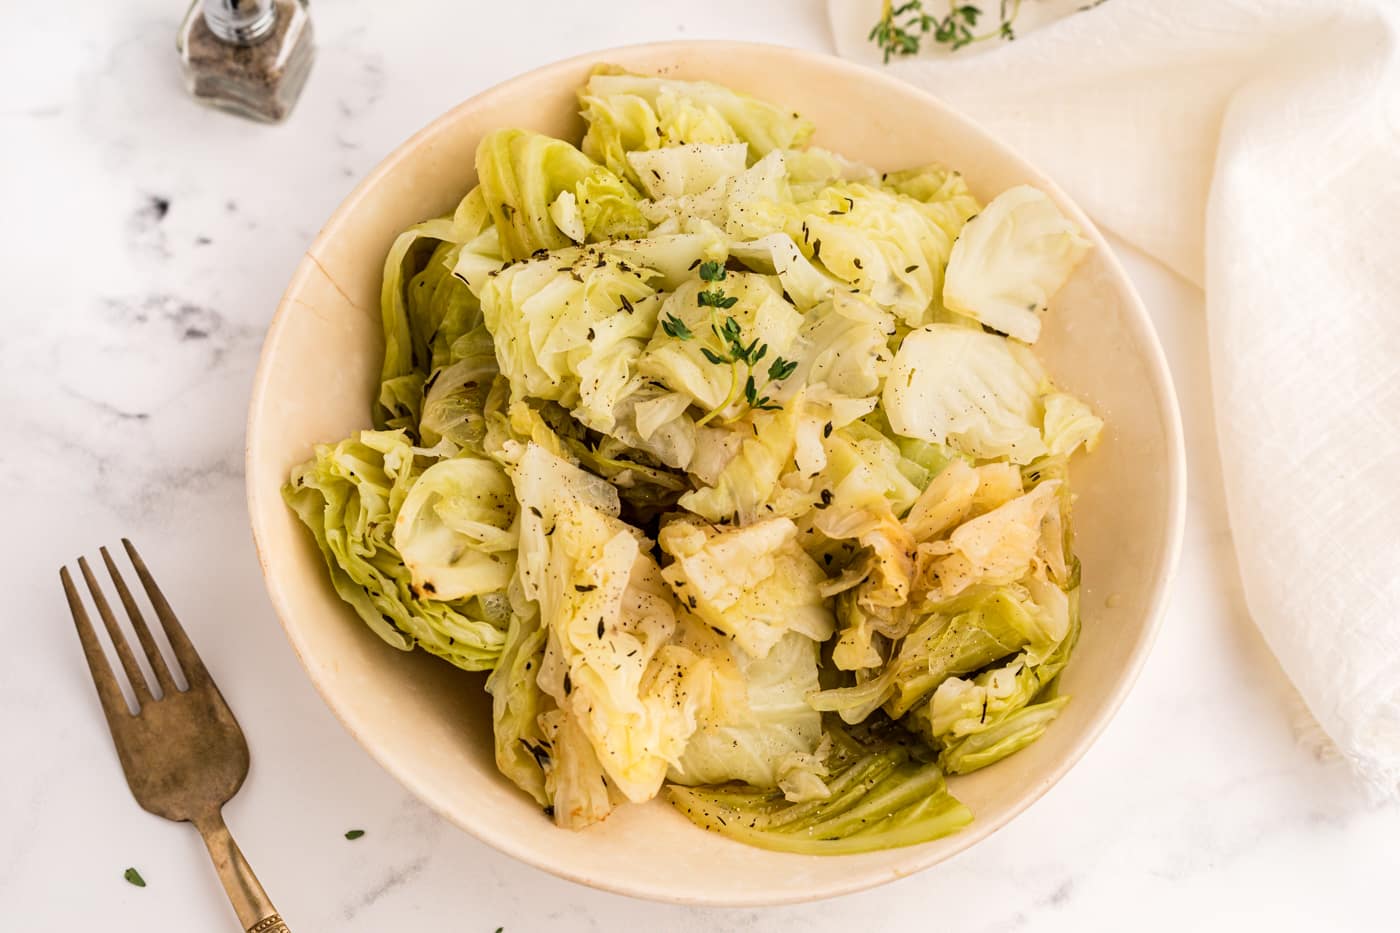 Smothered Cabbage - Budget Delicious